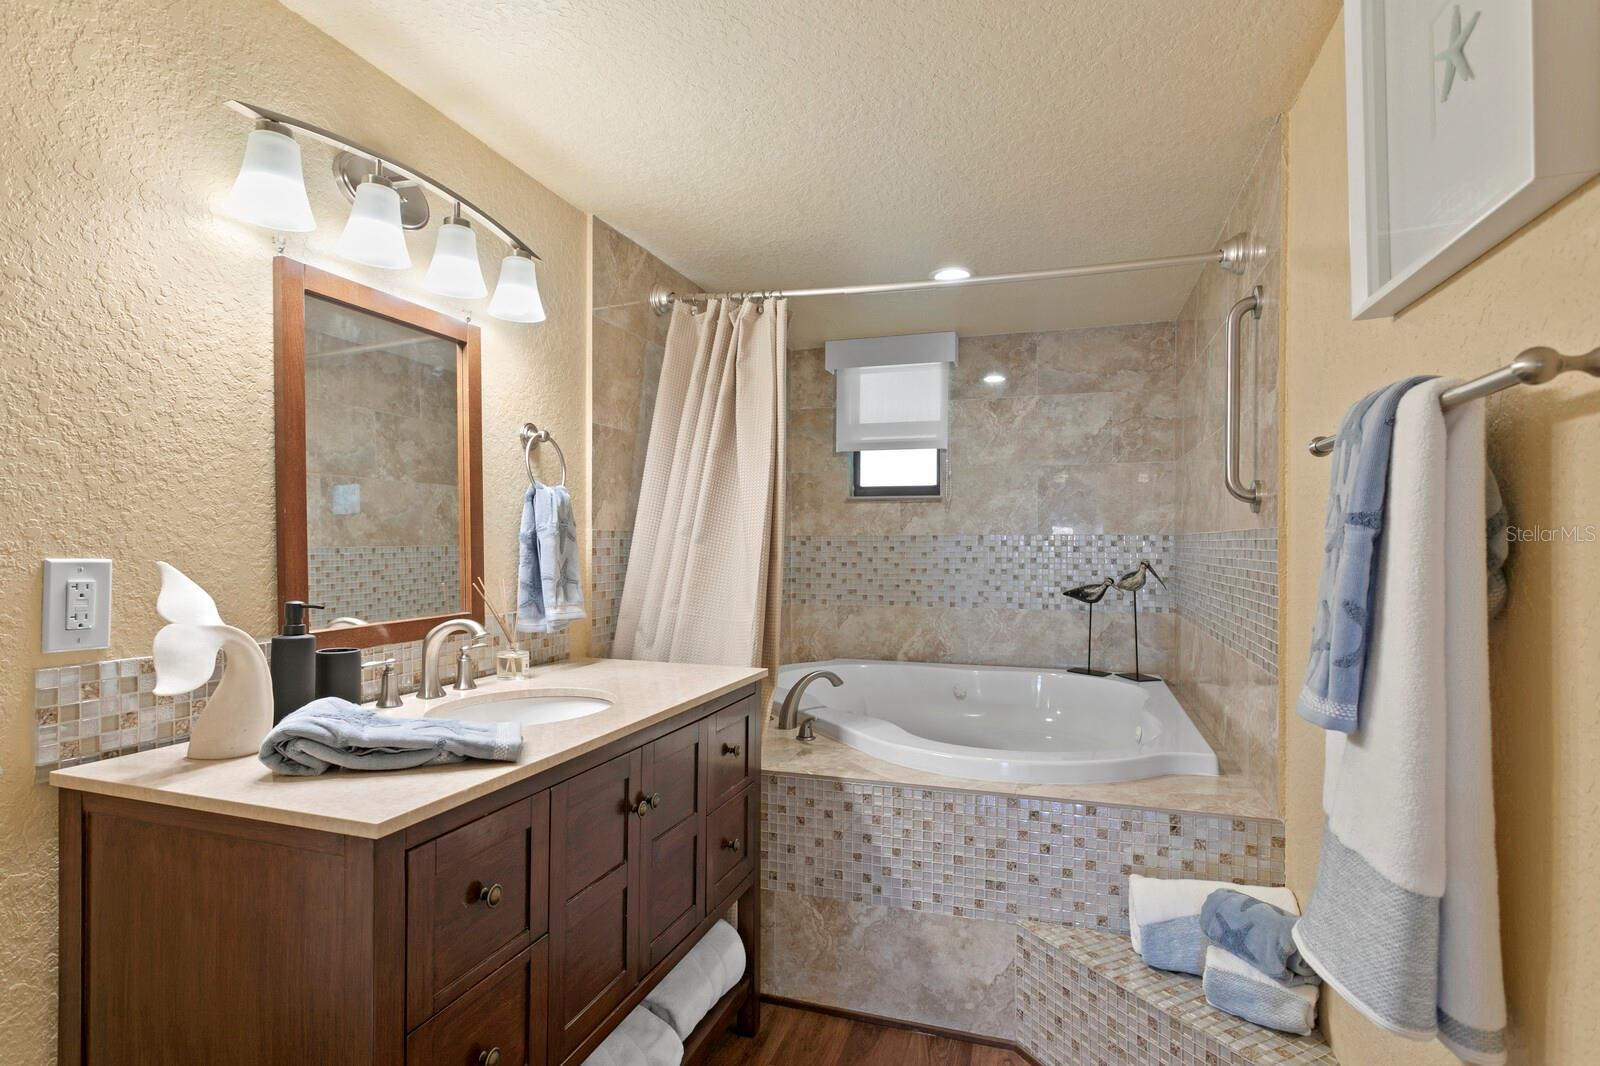 Ensuite Primary Bedroom Bathroom with Jacuzzi tub, shower, and updated tile.